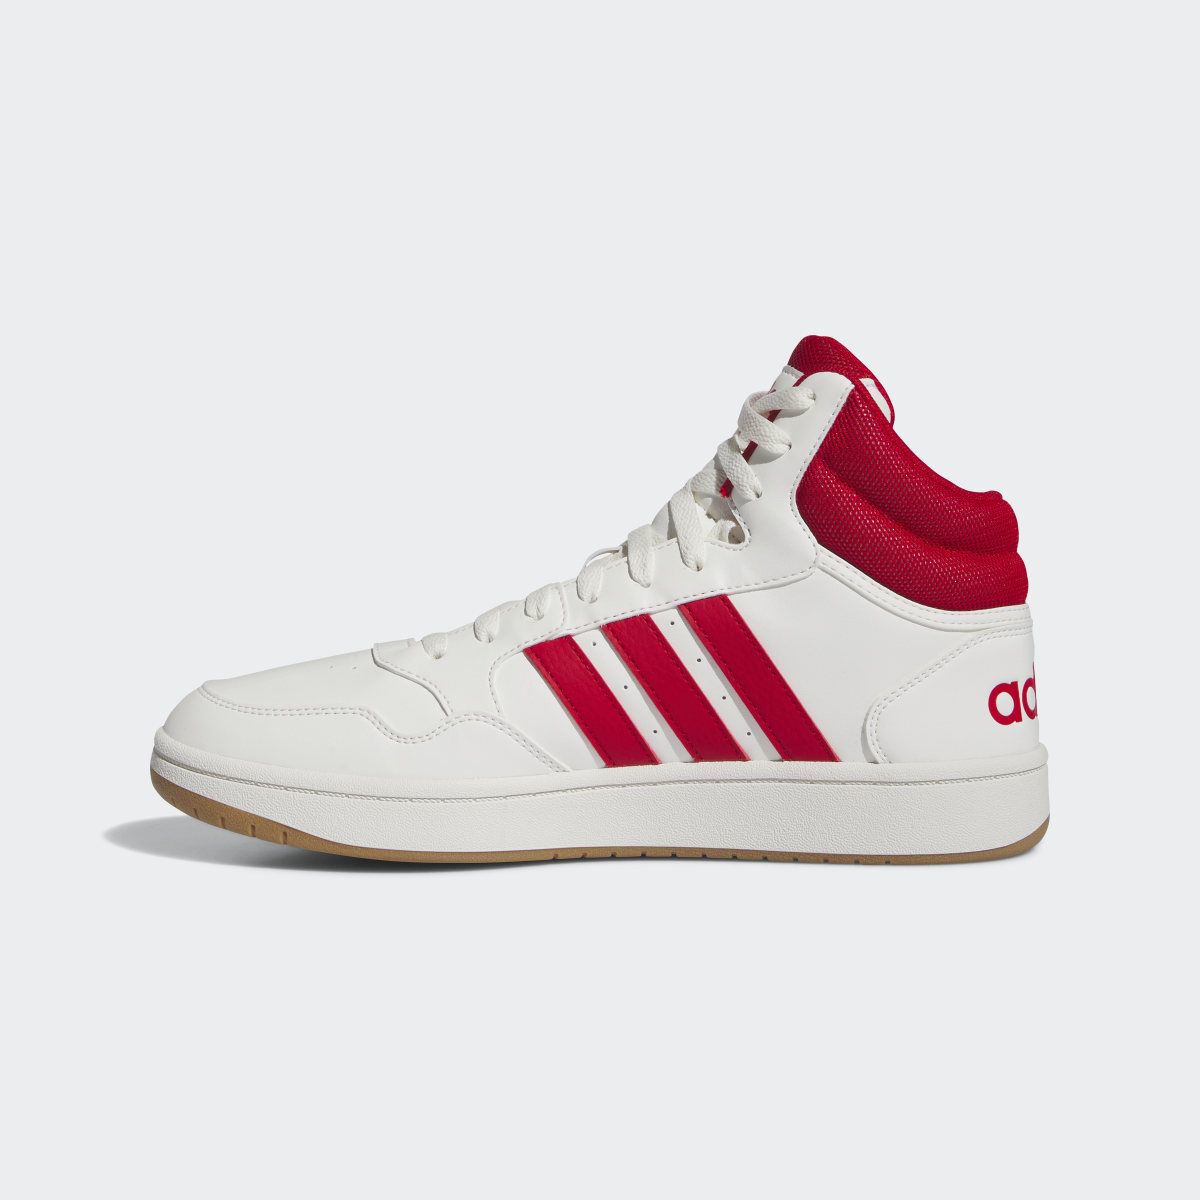 Adidas Hoops 3.0 Mid Classic Vintage Shoes. 7